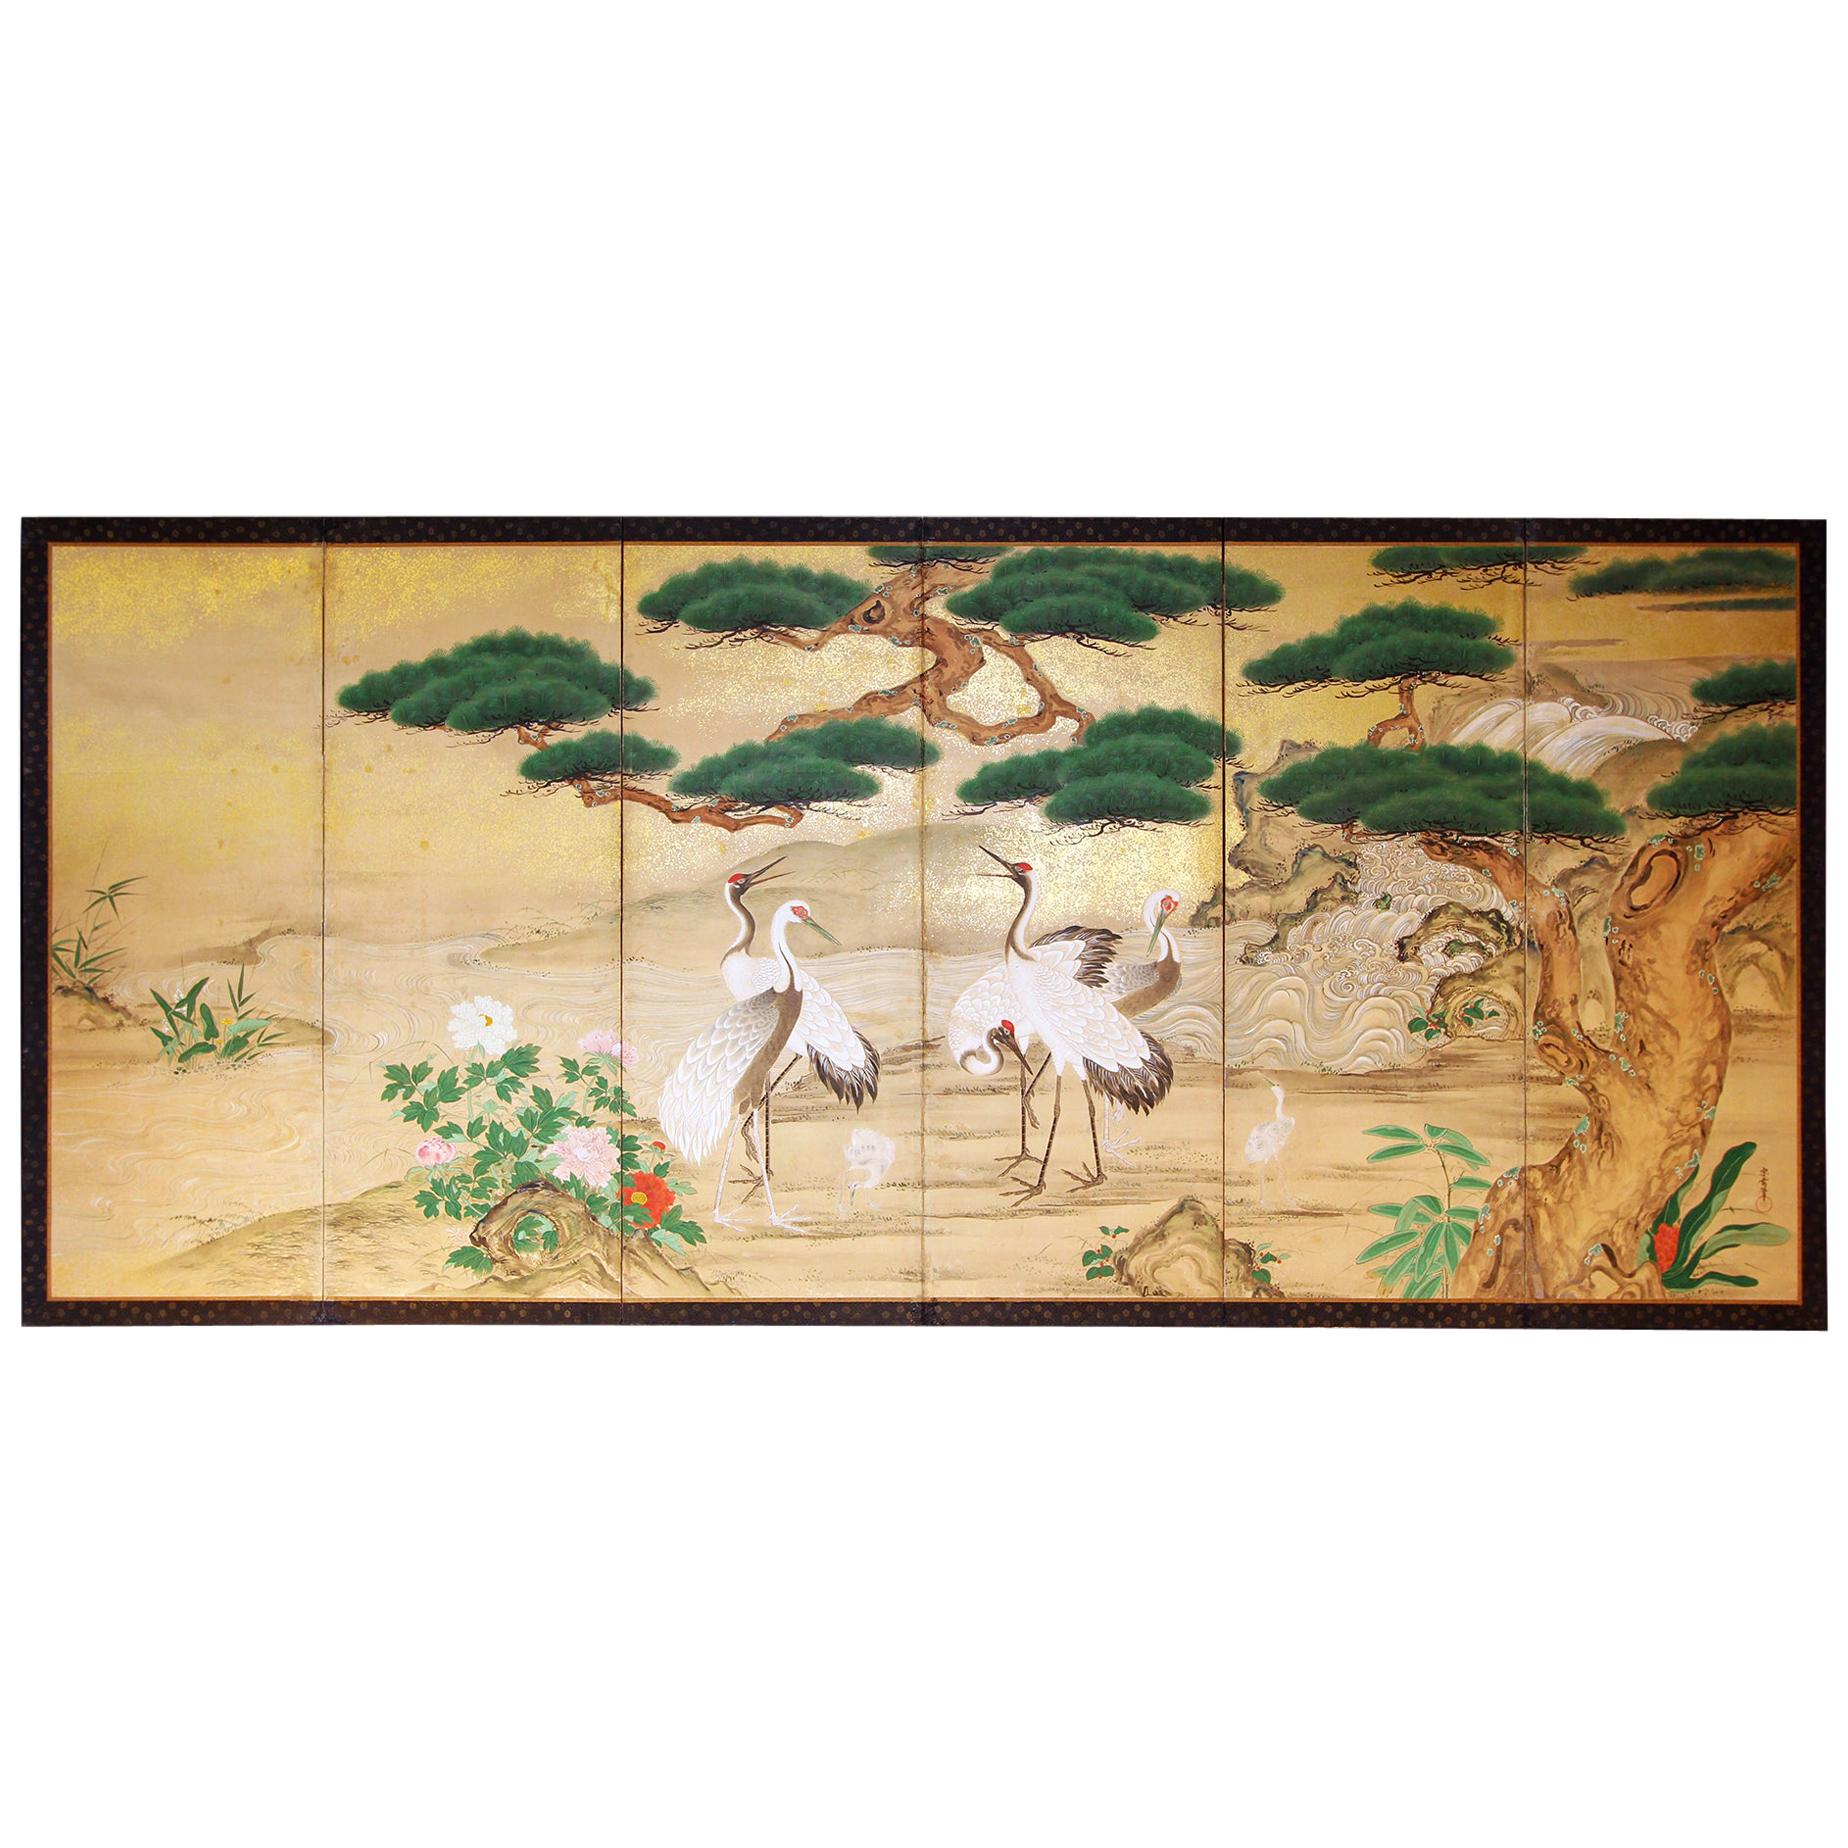 19th Century Japanese Landscape Folding Screen Rice Paper and Gold Specks